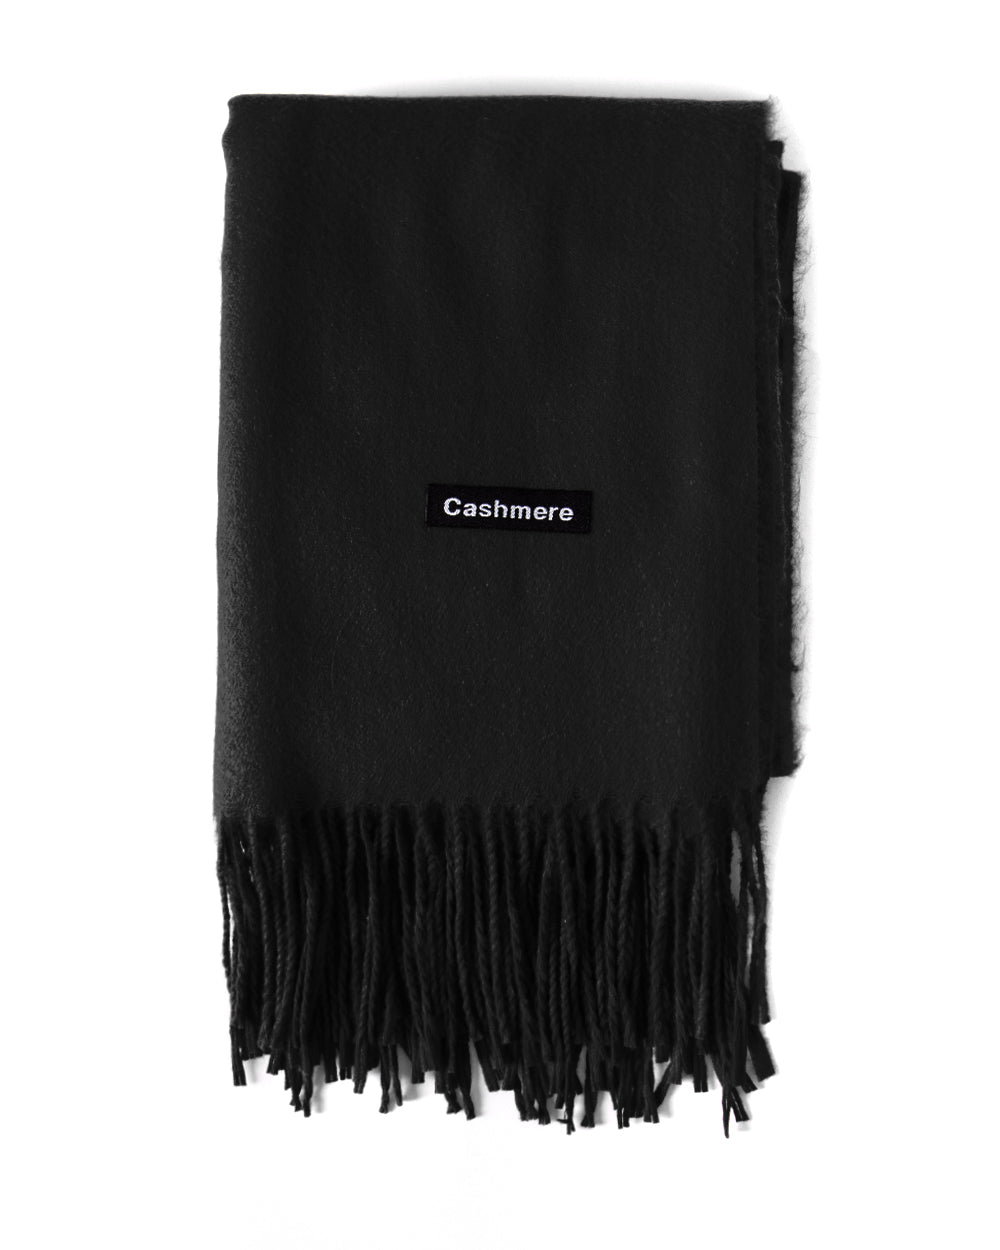 Unisex Scarf for Men and Women Solid Color Black Casual Soft Basic Fringes GIOSAL-SH1004A